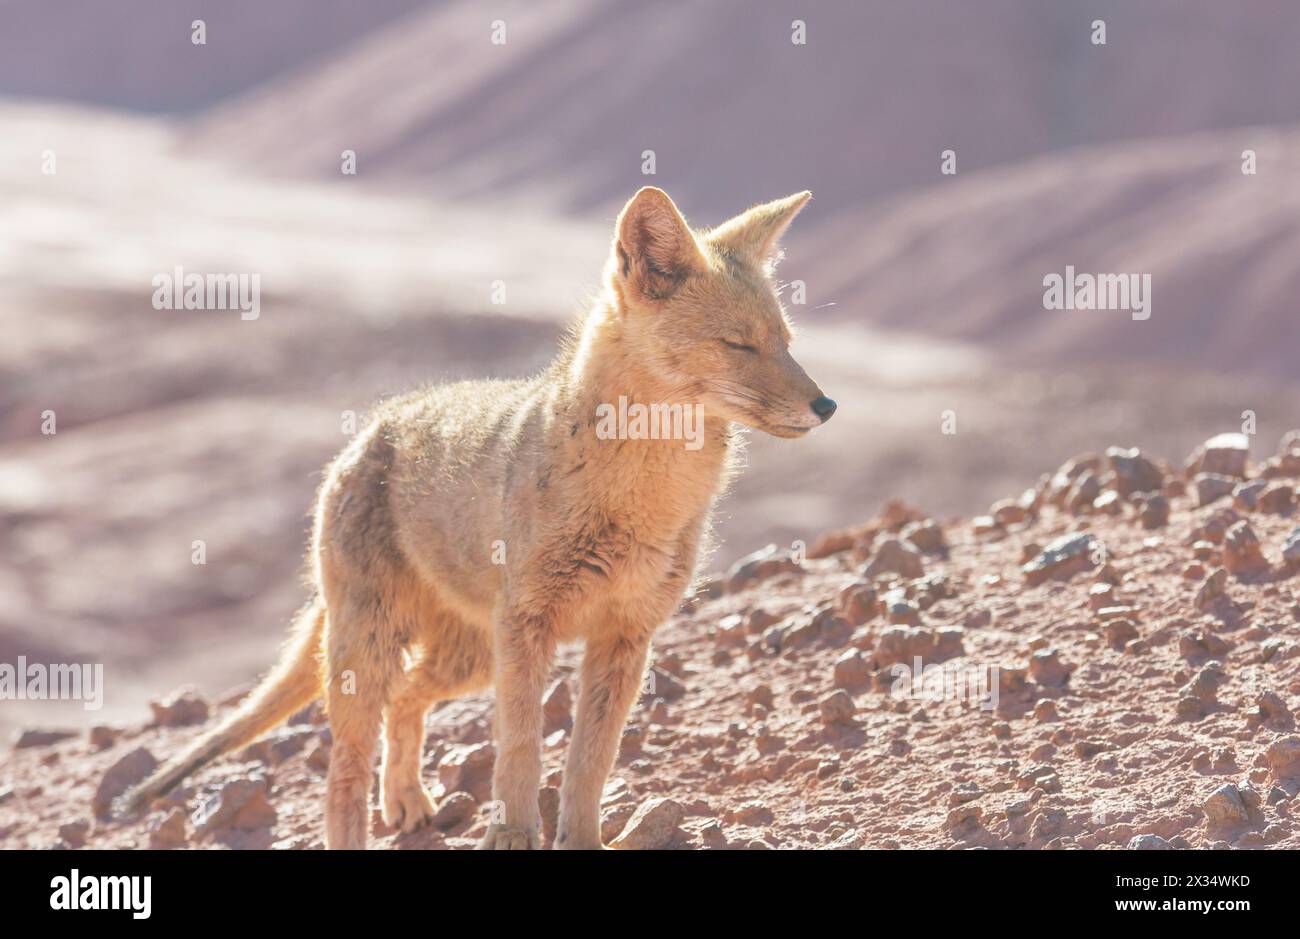 South American gray fox (Lycalopex griseus), Patagonian fox, in Patagonia mountains Stock Photo